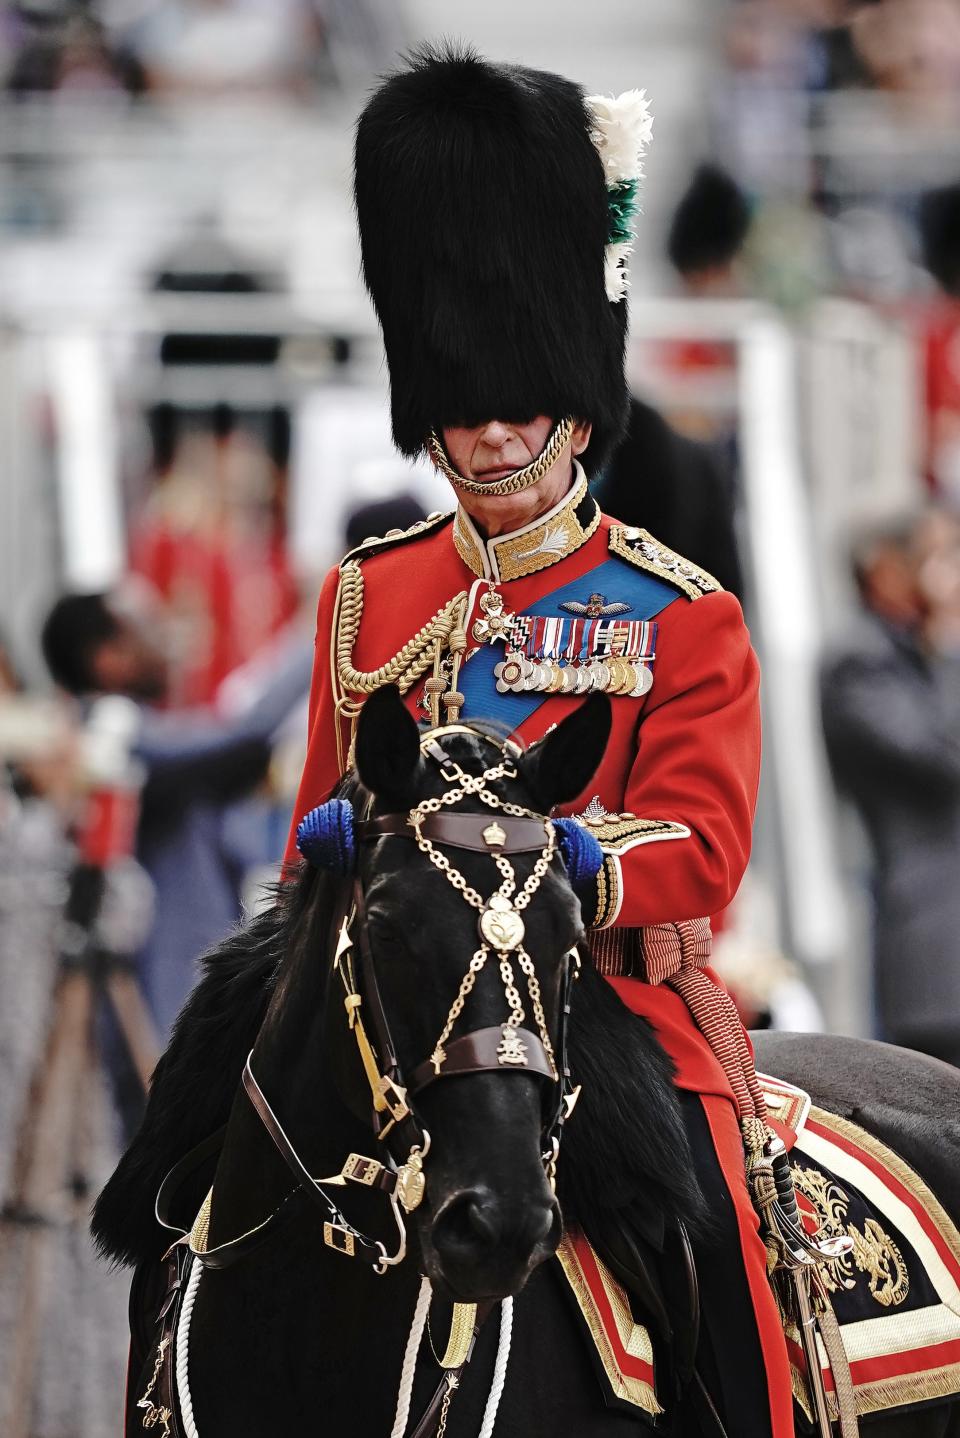 King Charles III during the Trooping the Colour ceremony (PA)